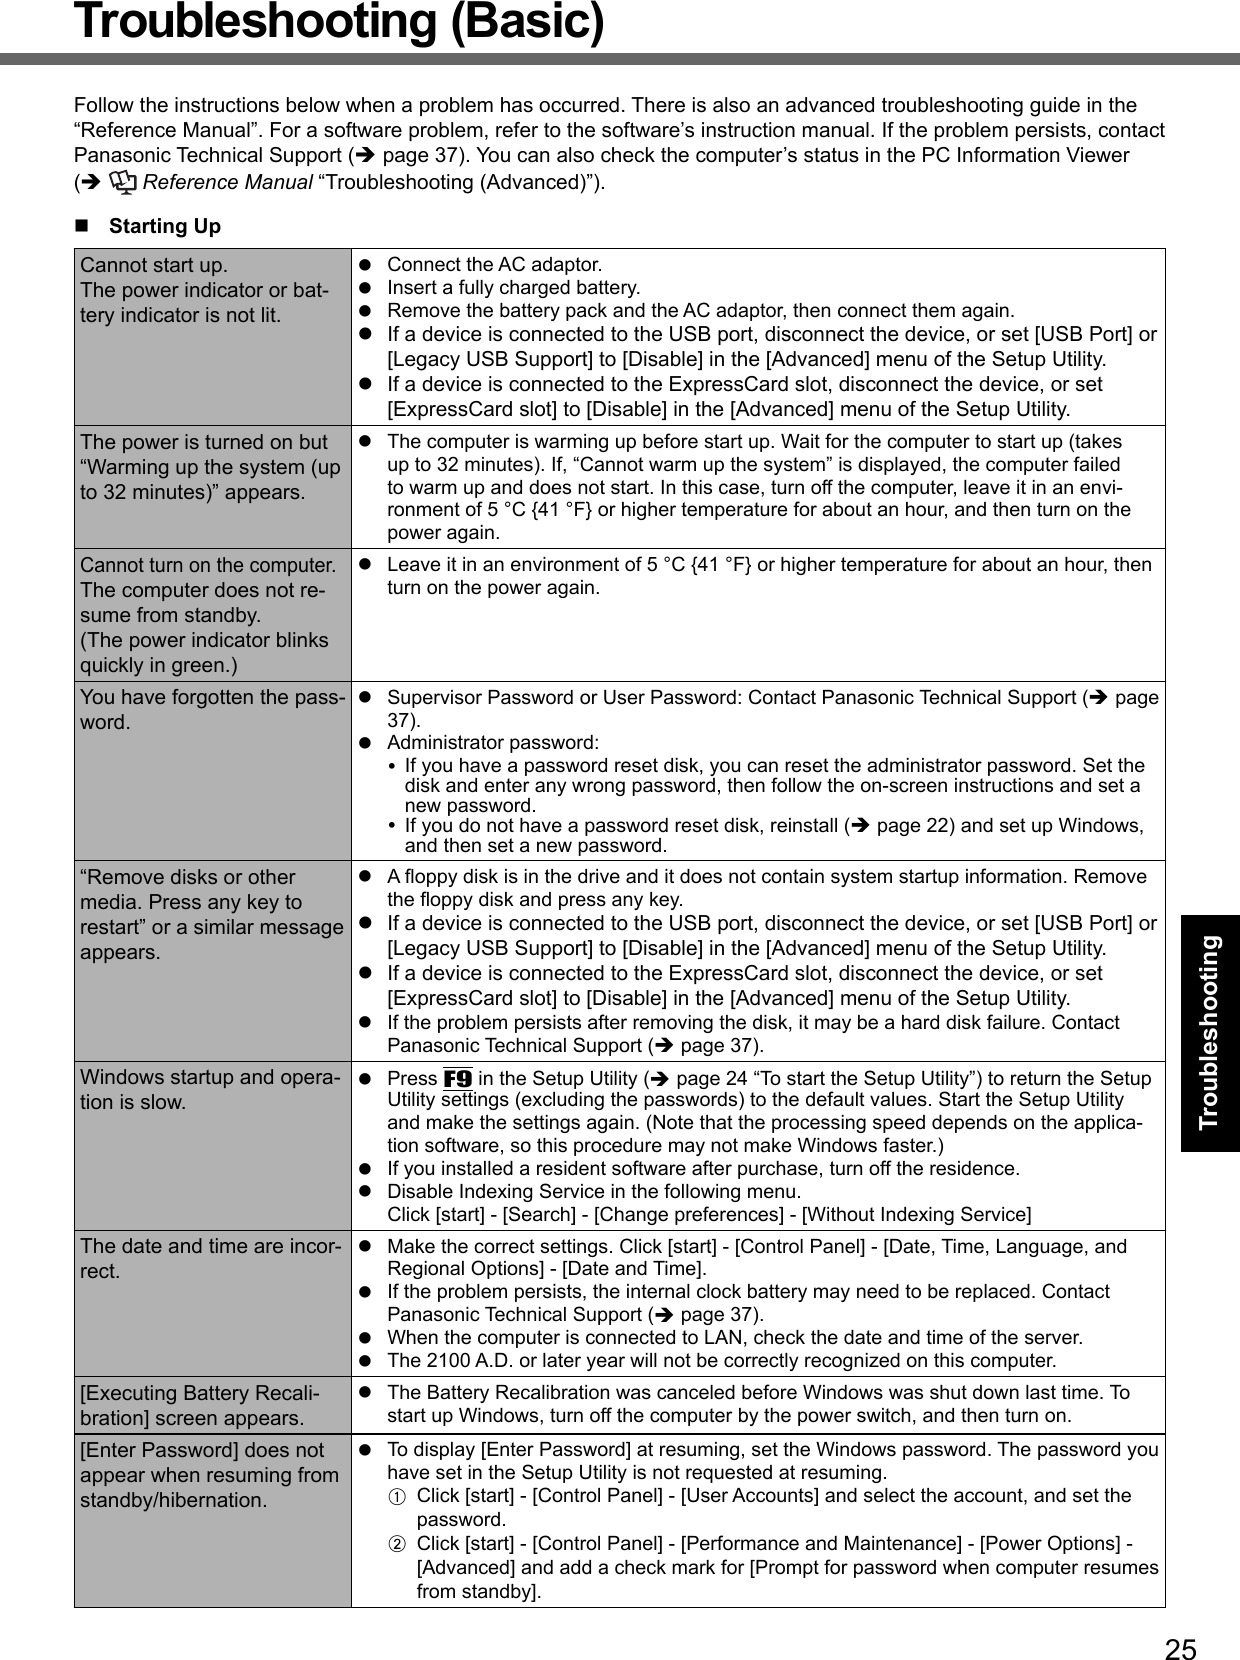 25TroubleshootingTroubleshooting (Basic)Follow the instructions below when a problem has occurred. There is also an advanced troubleshooting guide in the “Reference Manual”. For a software problem, refer to the software’s instruction manual. If the problem persists, contact Panasonic Technical Support ( page 37). You can also check the computer’s status in the PC Information Viewer (  Reference Manual “Troubleshooting (Advanced)”). Starting UpCannot start up.The power indicator or bat-tery indicator is not lit.  Connect the AC adaptor.  Insert a fully charged battery.  Remove the battery pack and the AC adaptor, then connect them again.   If a device is connected to the USB port, disconnect the device, or set [USB Port] or [Legacy USB Support] to [Disable] in the [Advanced] menu of the Setup Utility.  If a device is connected to the ExpressCard slot, disconnect the device, or set [ExpressCard slot] to [Disable] in the [Advanced] menu of the Setup Utility.The power is turned on but “Warming up the system (up to 32 minutes)” appears.  The computer is warming up before start up. Wait for the computer to start up (takes up to 32 minutes). If, “Cannot warm up the system” is displayed, the computer failed to warm up and does not start. In this case, turn off the computer, leave it in an envi-ronment of 5 °C {41 °F} or higher temperature for about an hour, and then turn on the power again.Cannot turn on the computer.The computer does not re-sume from standby.(The power indicator blinks quickly in green.)  Leave it in an environment of 5 °C {41 °F} or higher temperature for about an hour, then turn on the power again.You have forgotten the pass-word.  Supervisor Password or User Password: Contact Panasonic Technical Support ( page 37). Administrator password:   If you have a password reset disk, you can reset the administrator password. Set the disk and enter any wrong password, then follow the on-screen instructions and set a new password.  If you do not have a password reset disk, reinstall ( page 22) and set up Windows, and then set a new password.“Remove disks or other media. Press any key to restart” or a similar message appears. A ﬂ oppy disk is in the drive and it does not contain system startup information. Remove the ﬂ oppy disk and press any key.  If a device is connected to the USB port, disconnect the device, or set [USB Port] or [Legacy USB Support] to [Disable] in the [Advanced] menu of the Setup Utility.  If a device is connected to the ExpressCard slot, disconnect the device, or set [ExpressCard slot] to [Disable] in the [Advanced] menu of the Setup Utility.  If the problem persists after removing the disk, it may be a hard disk failure. Contact Panasonic Technical Support ( page 37).Windows startup and opera-tion is slow. Press F9 in the Setup Utility ( page 24 “To start the Setup Utility”) to return the Setup Utility settings (excluding the passwords) to the default values. Start the Setup Utility and make the settings again. (Note that the processing speed depends on the applica-tion software, so this procedure may not make Windows faster.)  If you installed a resident software after purchase, turn off the residence.  Disable Indexing Service in the following menu.Click [start] - [Search] - [Change preferences] - [Without Indexing Service]The date and time are incor-rect.  Make the correct settings. Click [start] - [Control Panel] - [Date, Time, Language, and Regional Options] - [Date and Time].  If the problem persists, the internal clock battery may need to be replaced. Contact Panasonic Technical Support ( page 37).  When the computer is connected to LAN, check the date and time of the server.  The 2100 A.D. or later year will not be correctly recognized on this computer.[Executing Battery Recali-bration] screen appears.  The Battery Recalibration was canceled before Windows was shut down last time. To start up Windows, turn off the computer by the power switch, and then turn on.[Enter Password] does not appear when resuming from standby/hibernation.  To display [Enter Password] at resuming, set the Windows password. The password you have set in the Setup Utility is not requested at resuming.A  Click [start] - [Control Panel] - [User Accounts] and select the account, and set the password.B  Click [start] - [Control Panel] - [Performance and Maintenance] - [Power Options] - [Advanced] and add a check mark for [Prompt for password when computer resumes from standby].